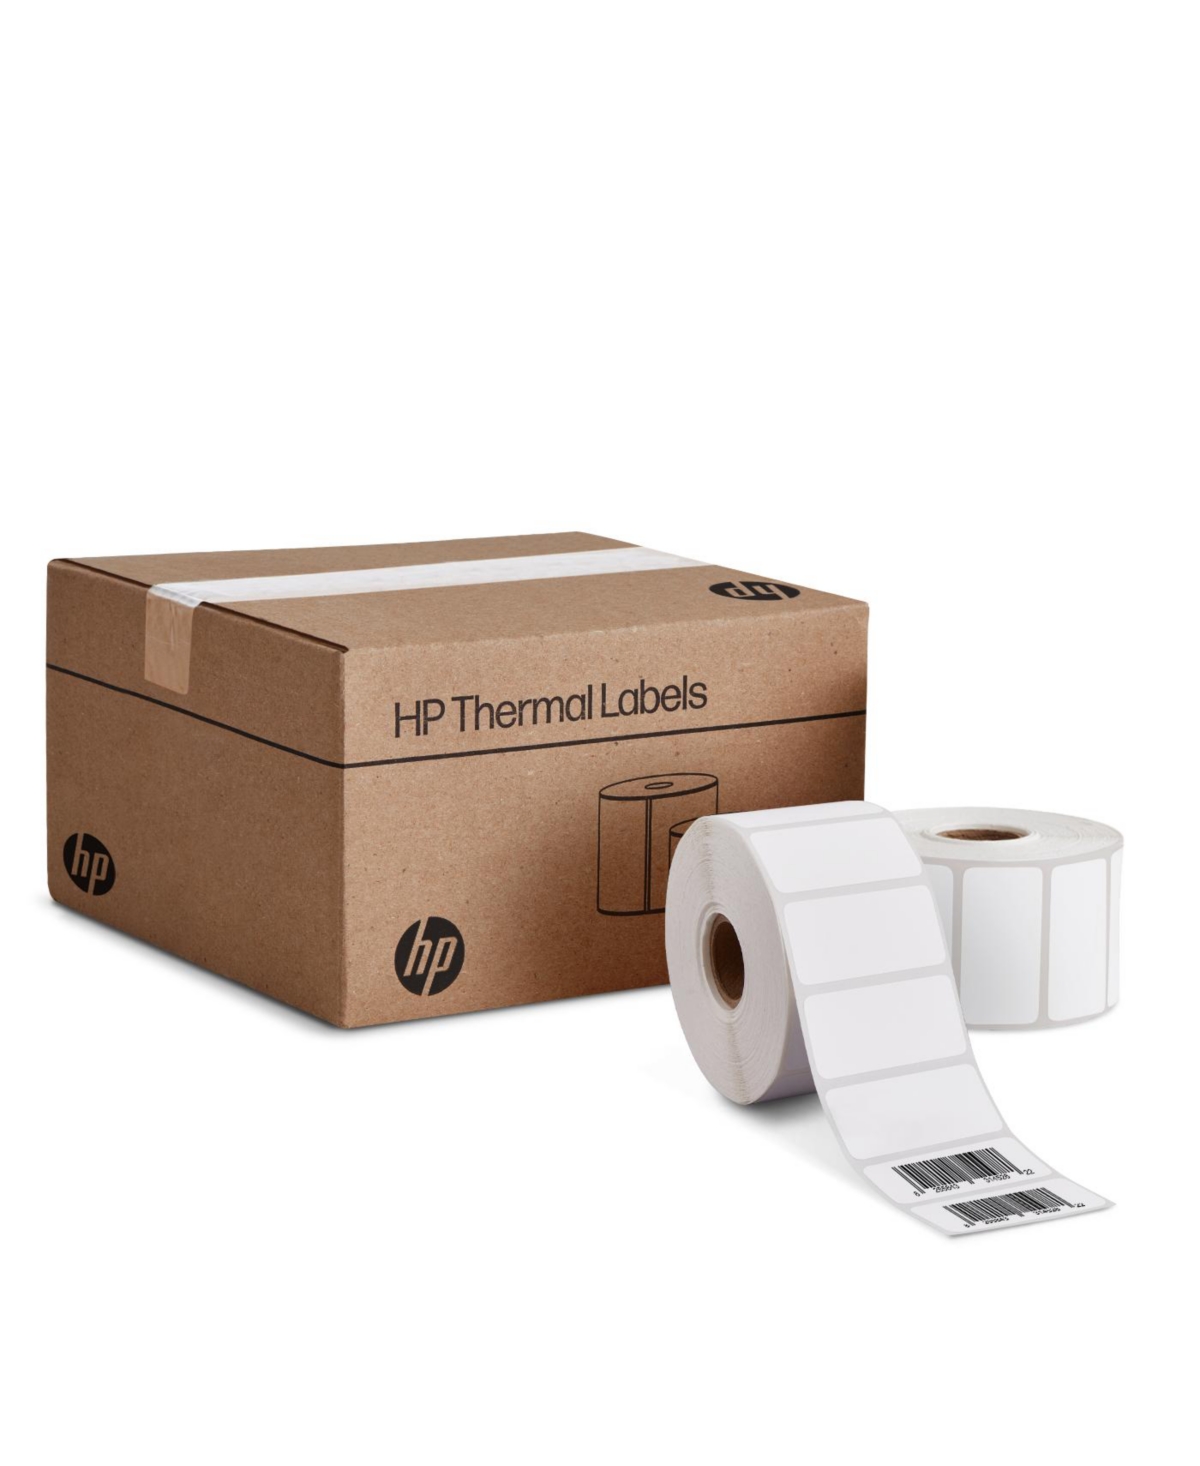 2x1" Direct Thermal Shipping Labels, 2 Rolls (2750 Labels) - Open White